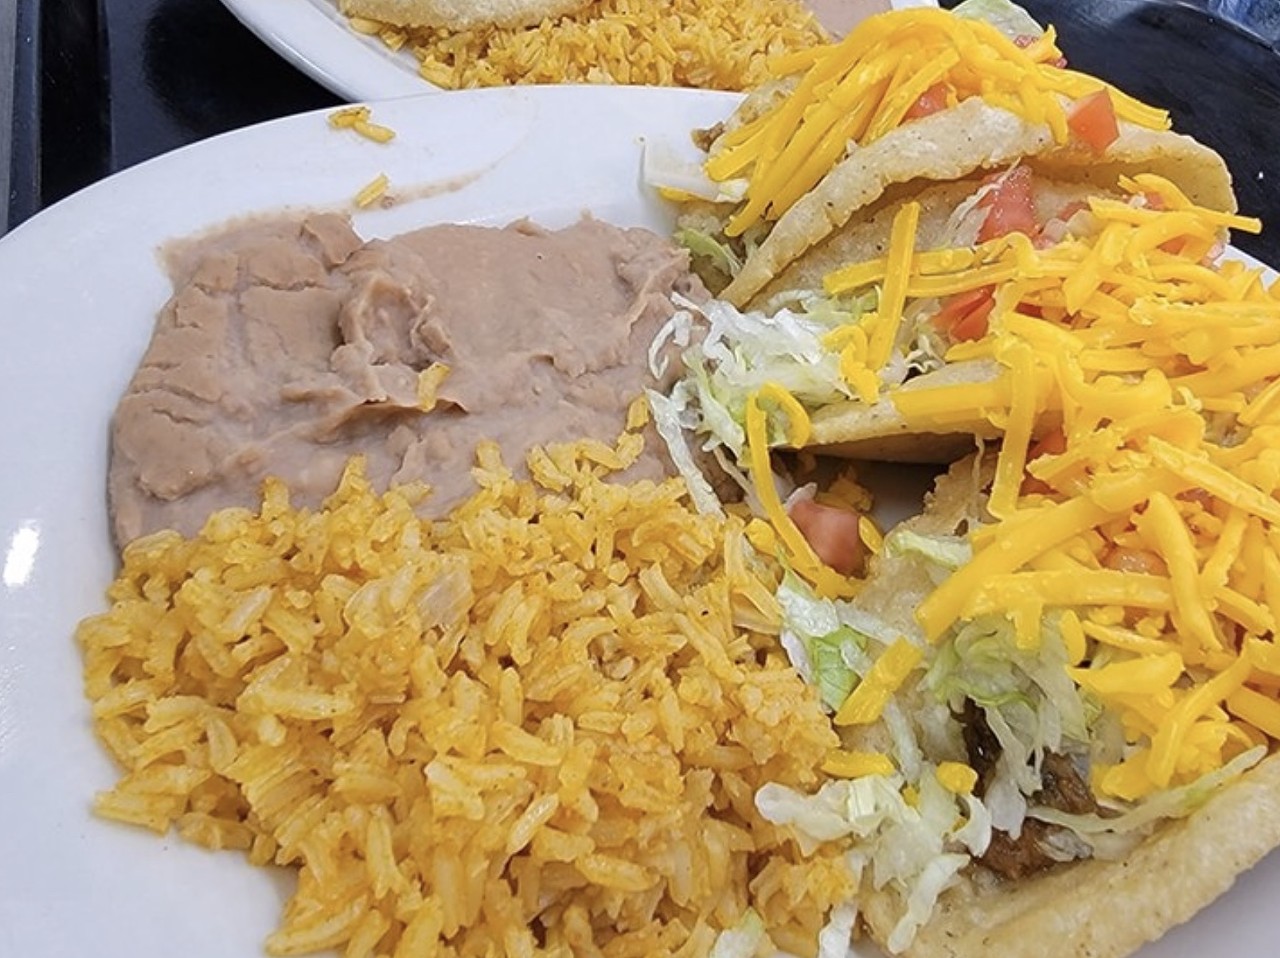 It's actually possible to get tired of Tex-Mex food.
Photo via Instagram / raysdriveinn